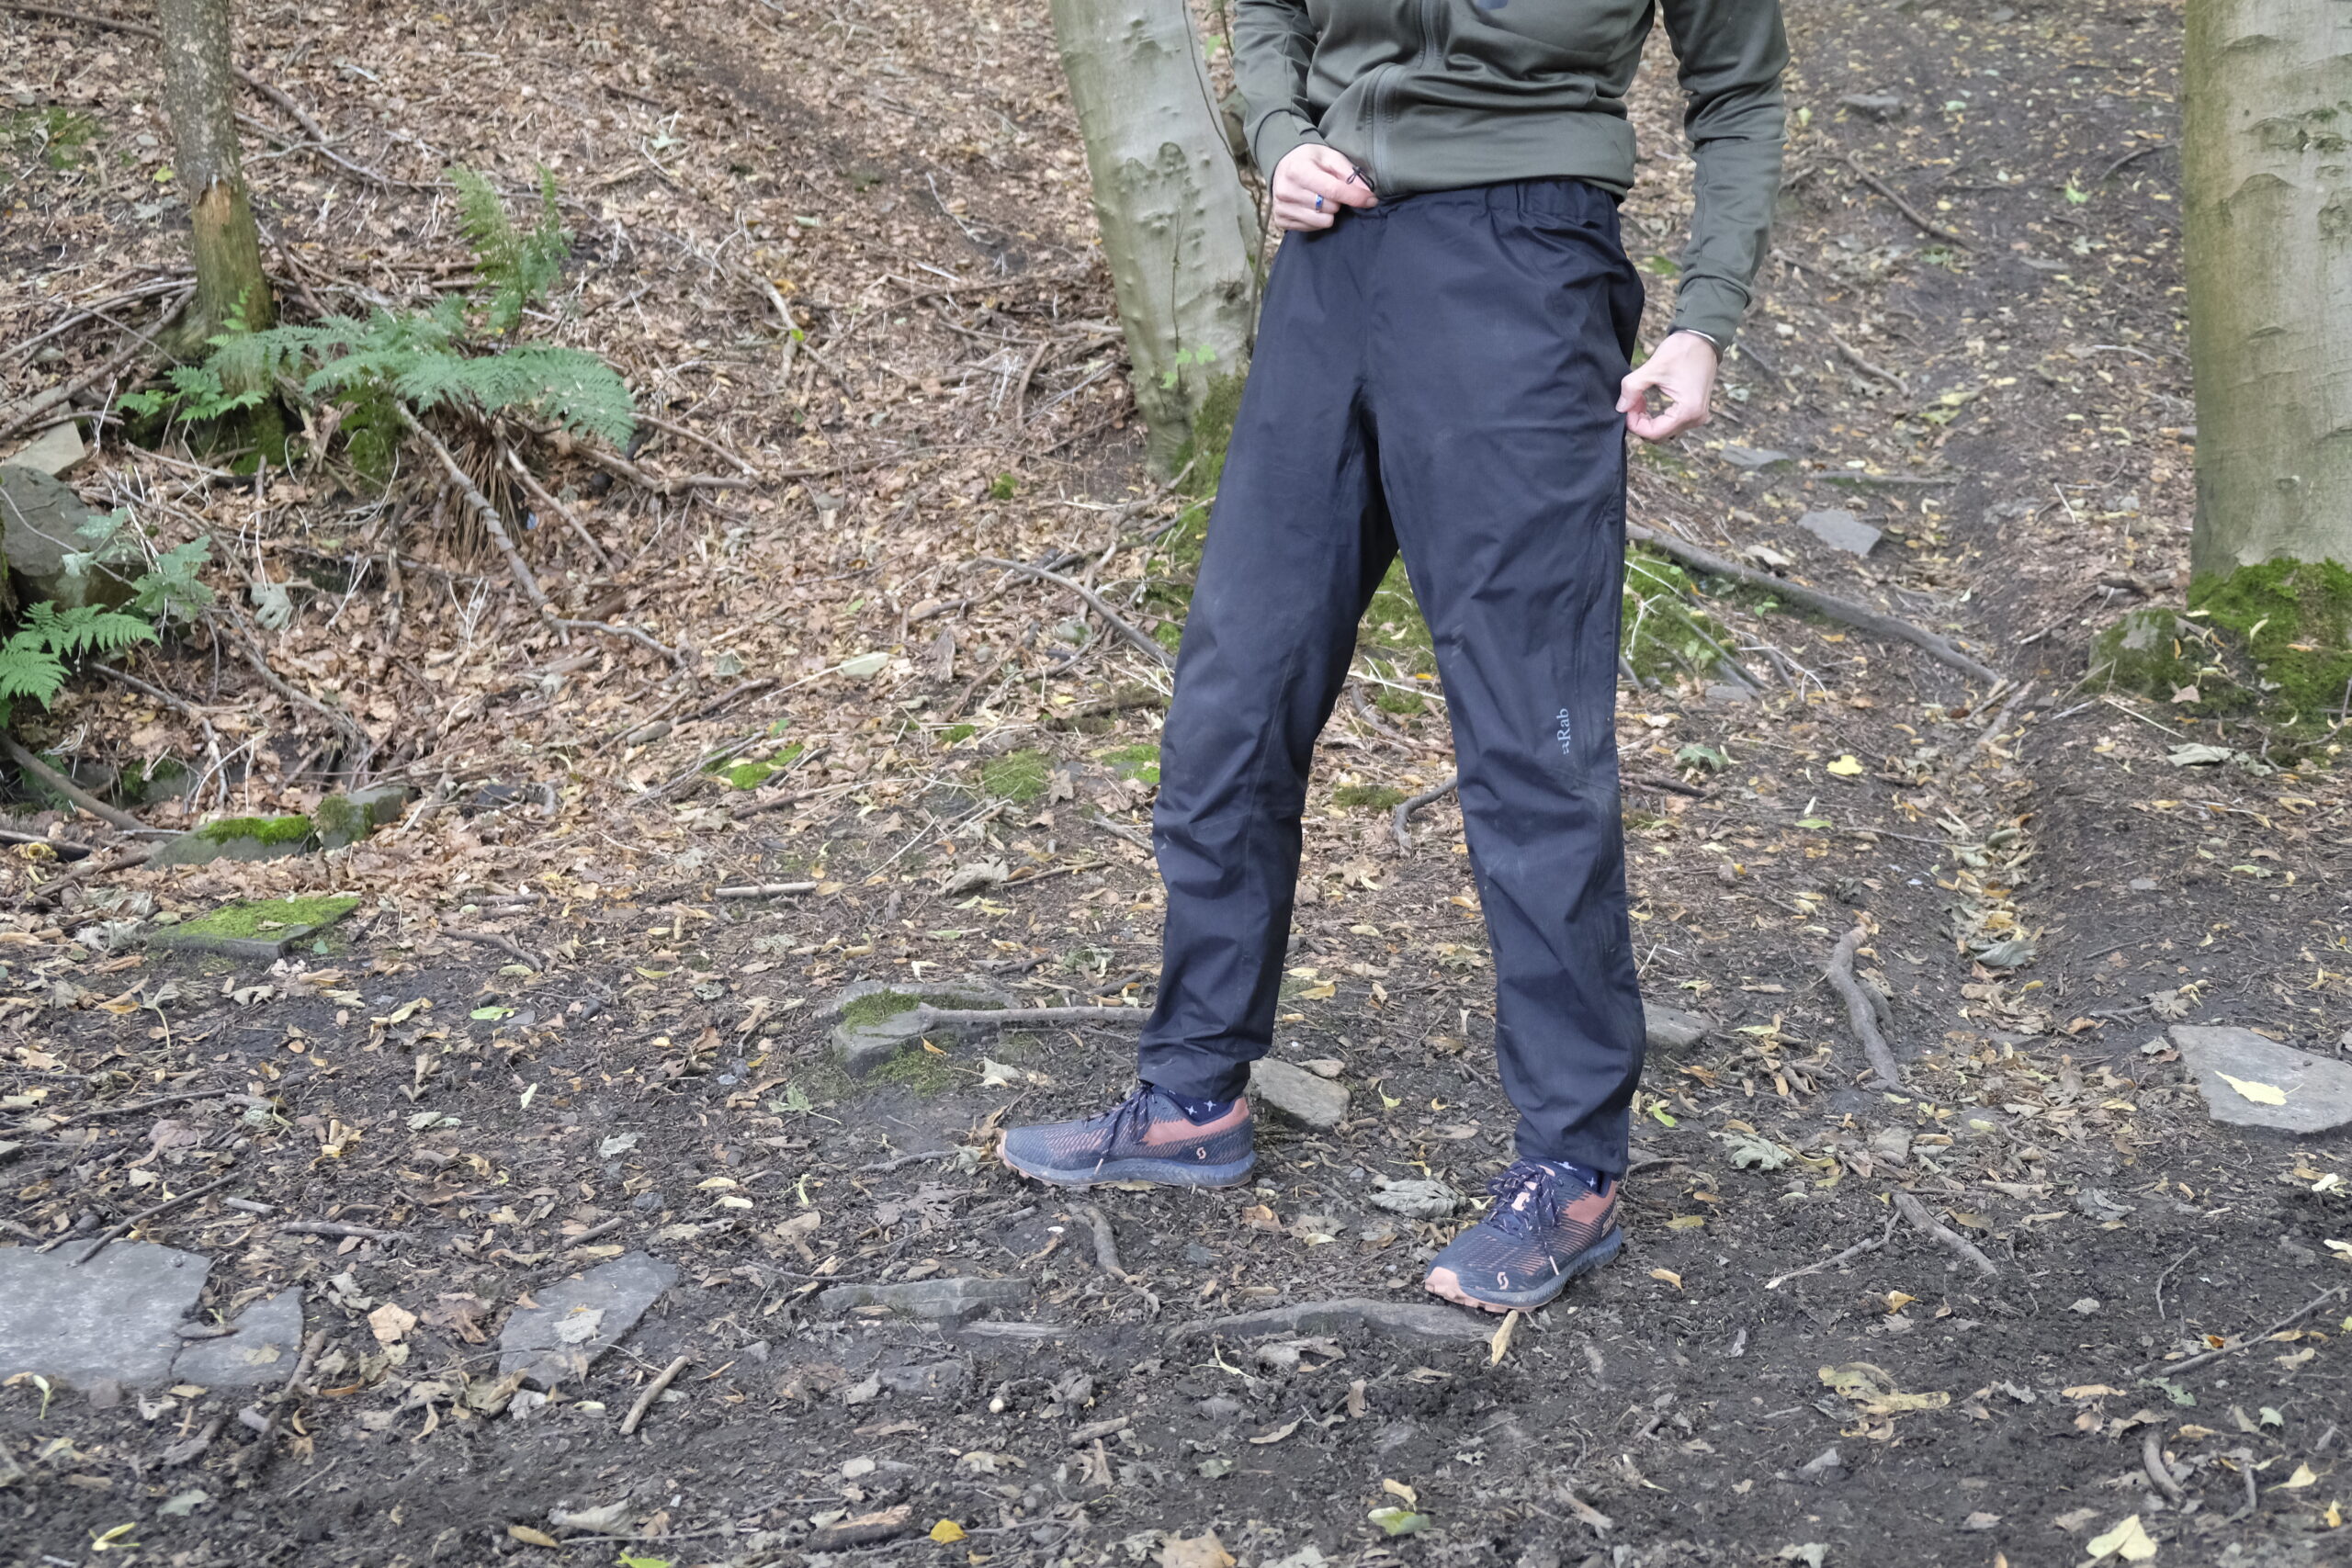 Review: Rab Cinder Kinetic Waterproof Jacket and Shorts - Cool of